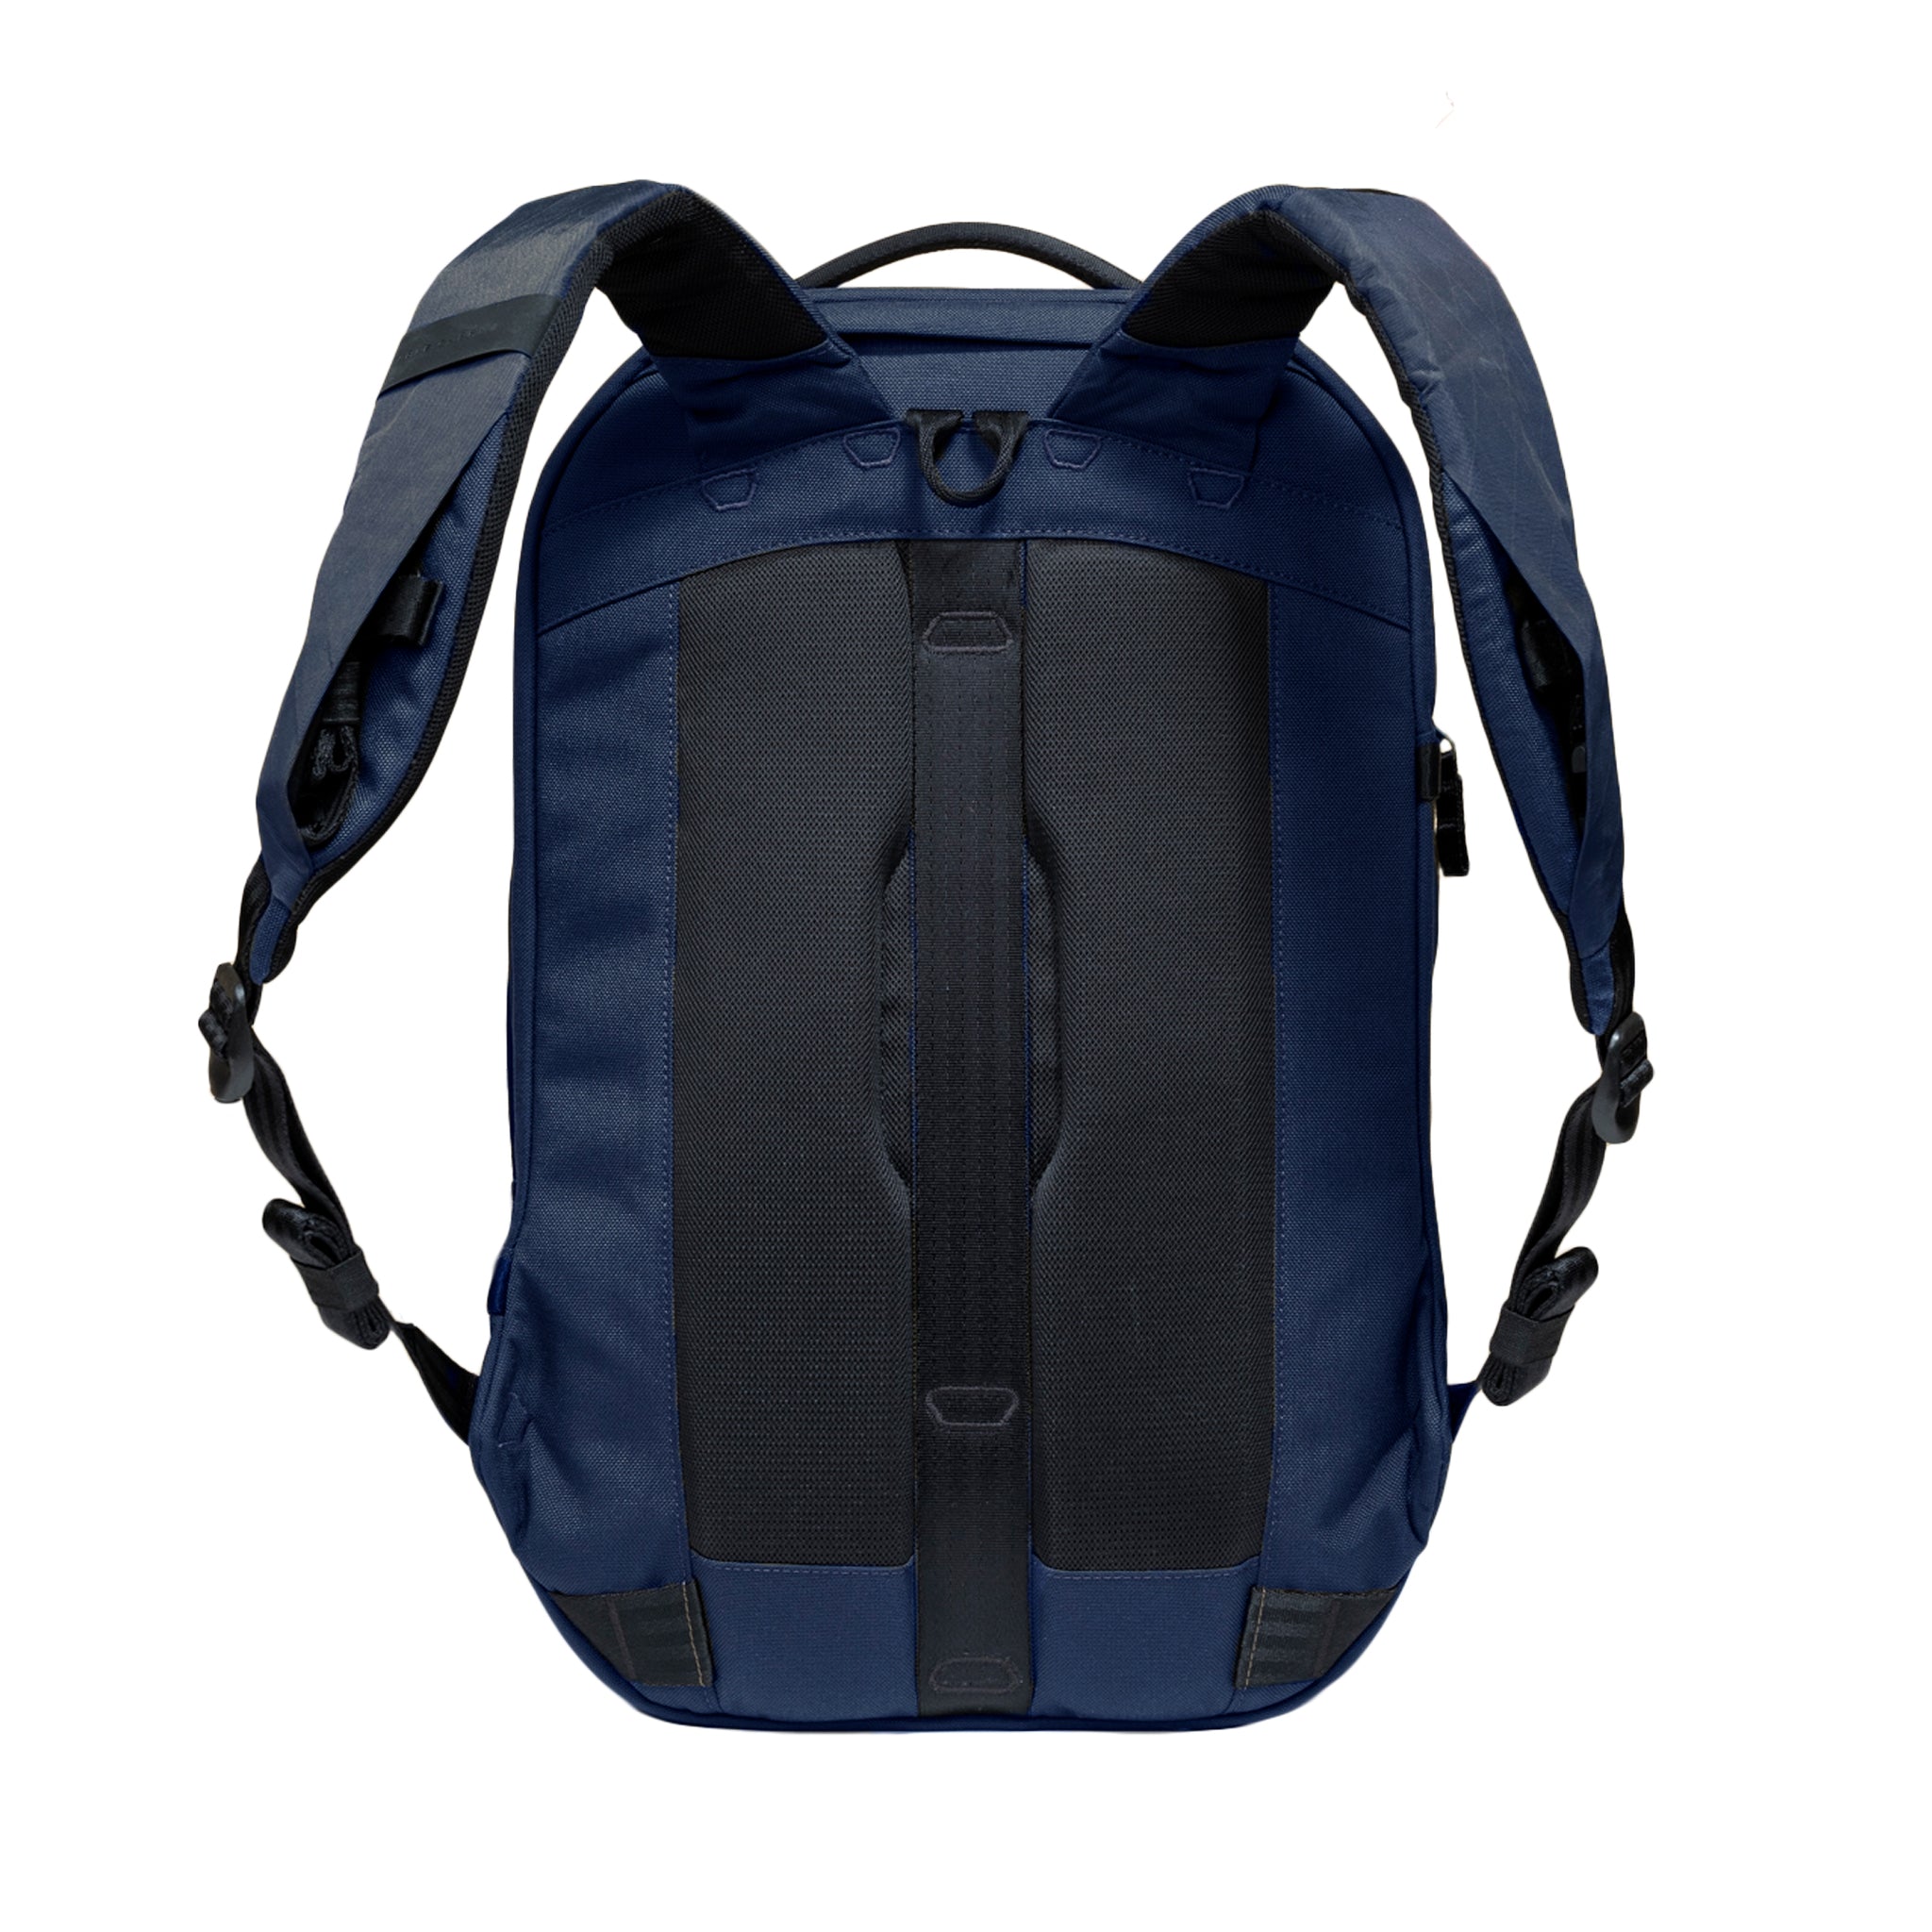 ABLE CARRY MAX BACKPACK - NAVY